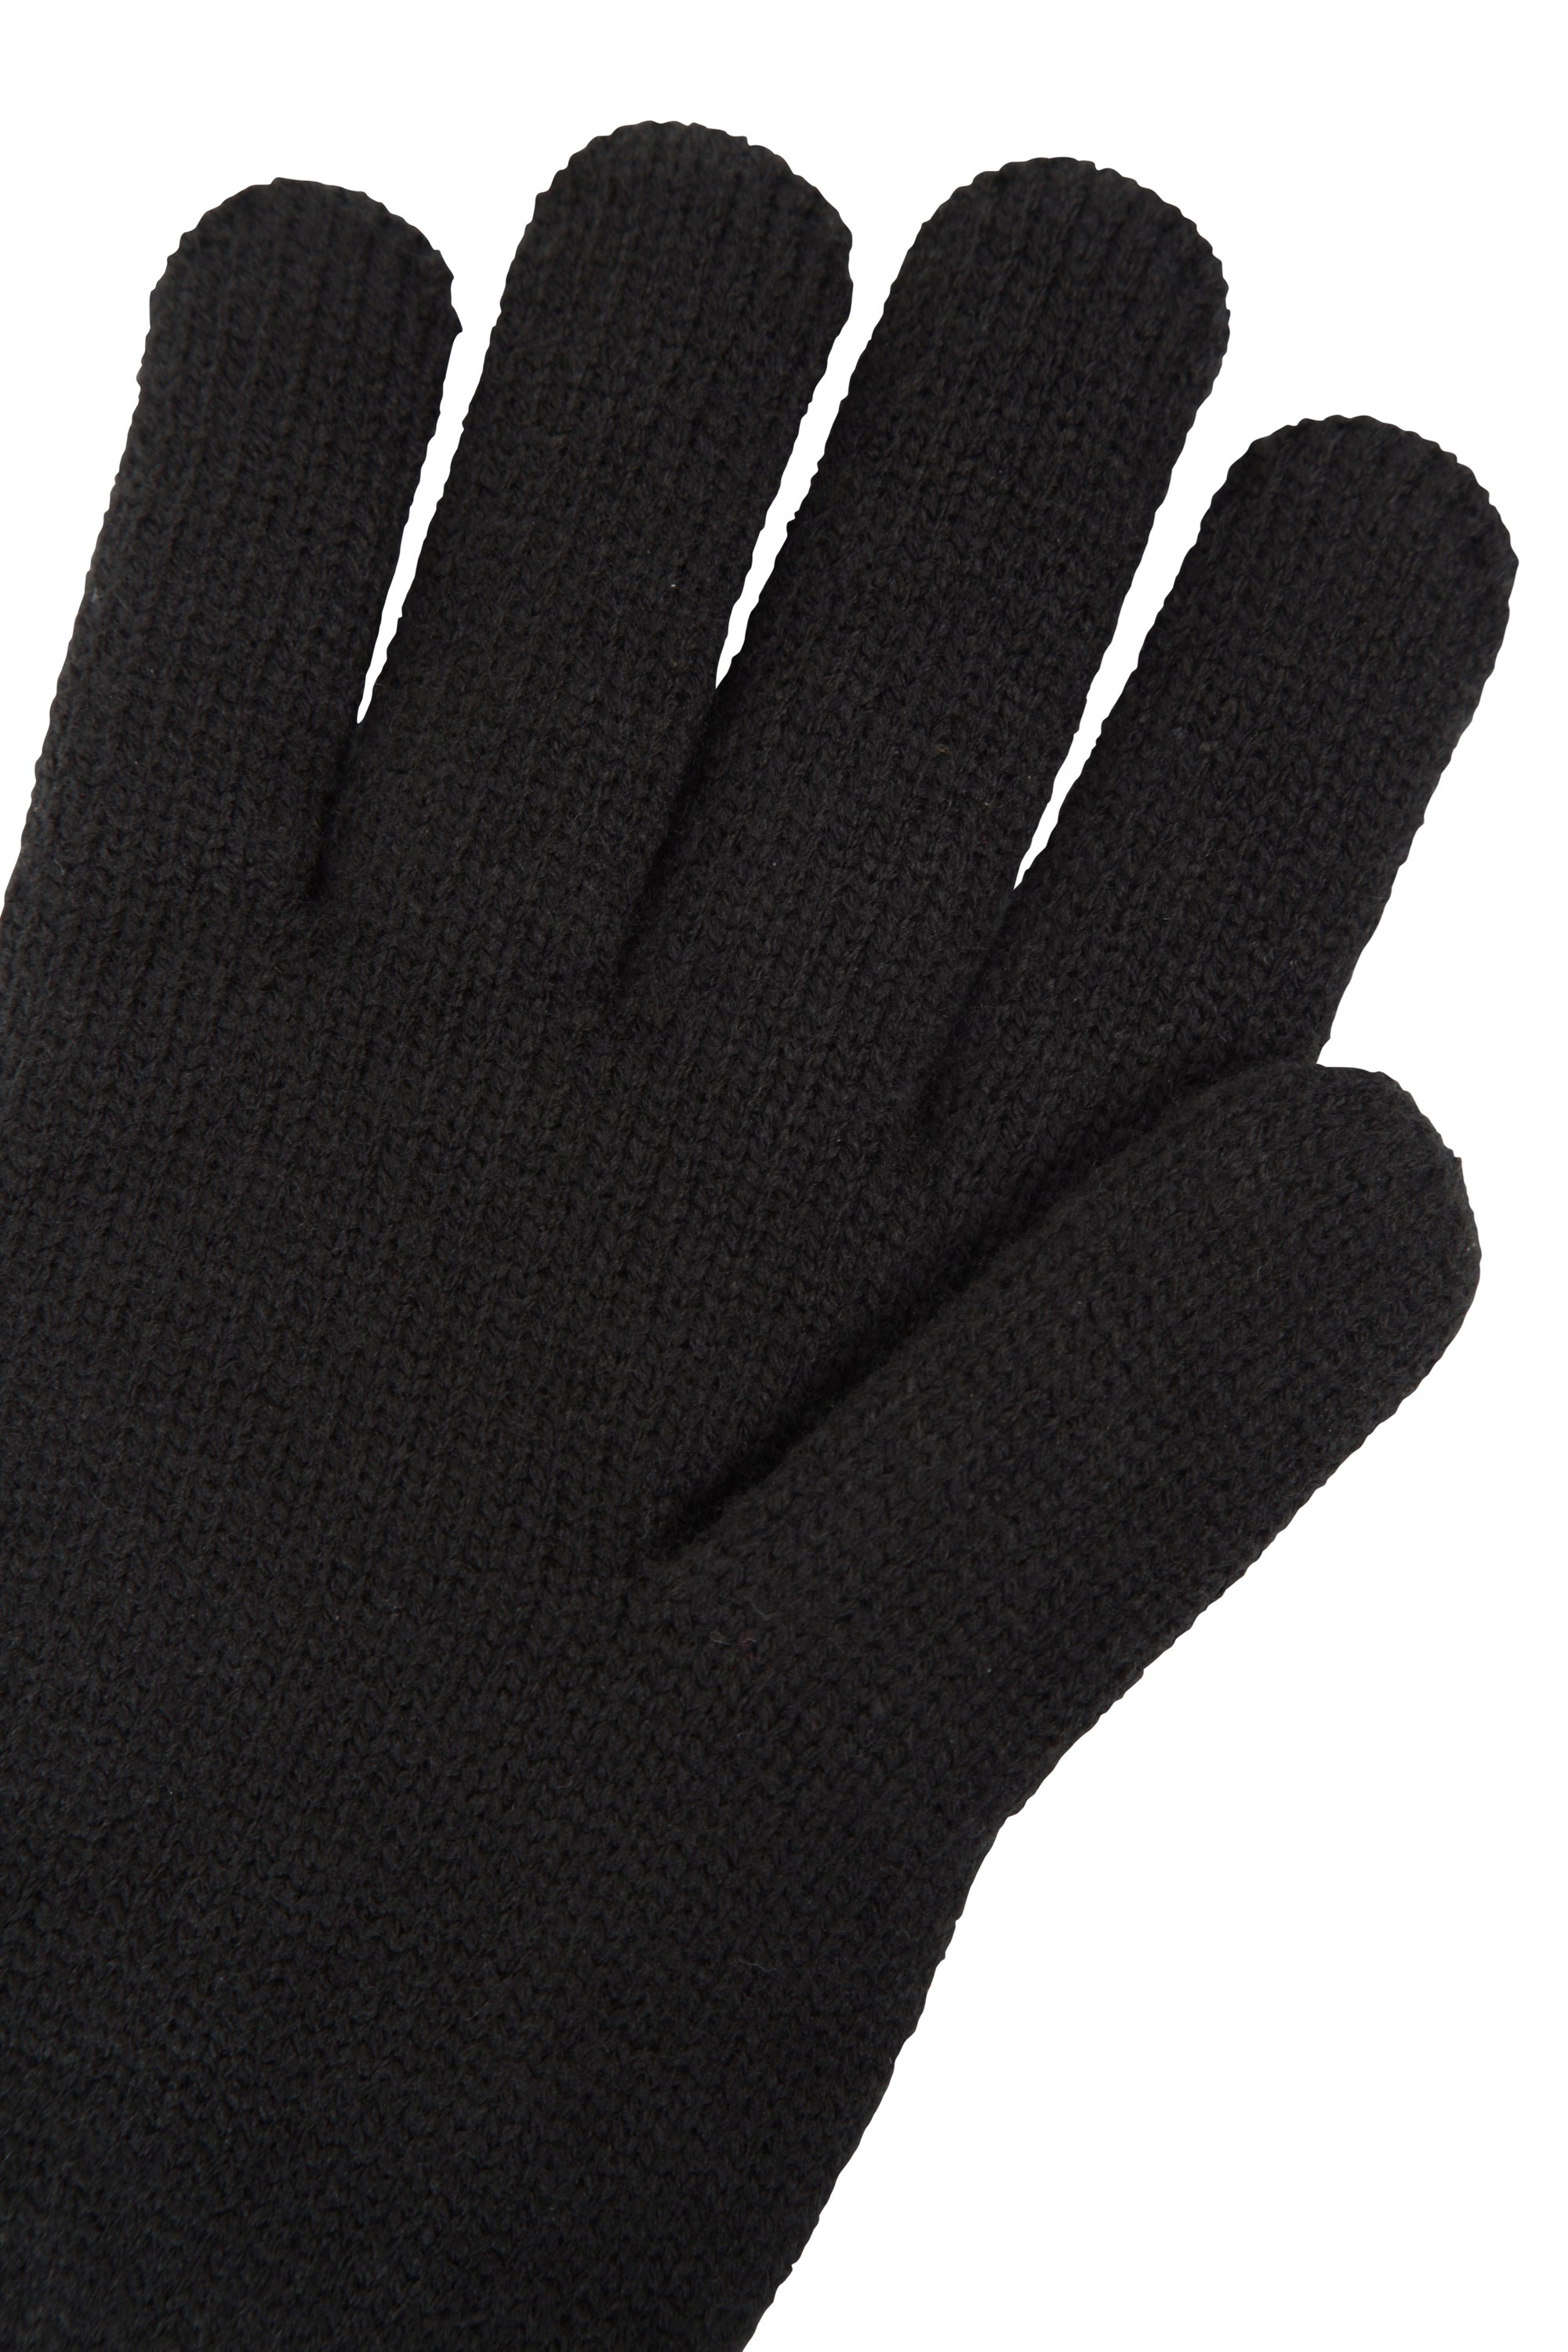 Mountain Warehouse Black Mountain Warehouse Thinsulate Lined Gloves Size M Approx Age 11-13 Years 